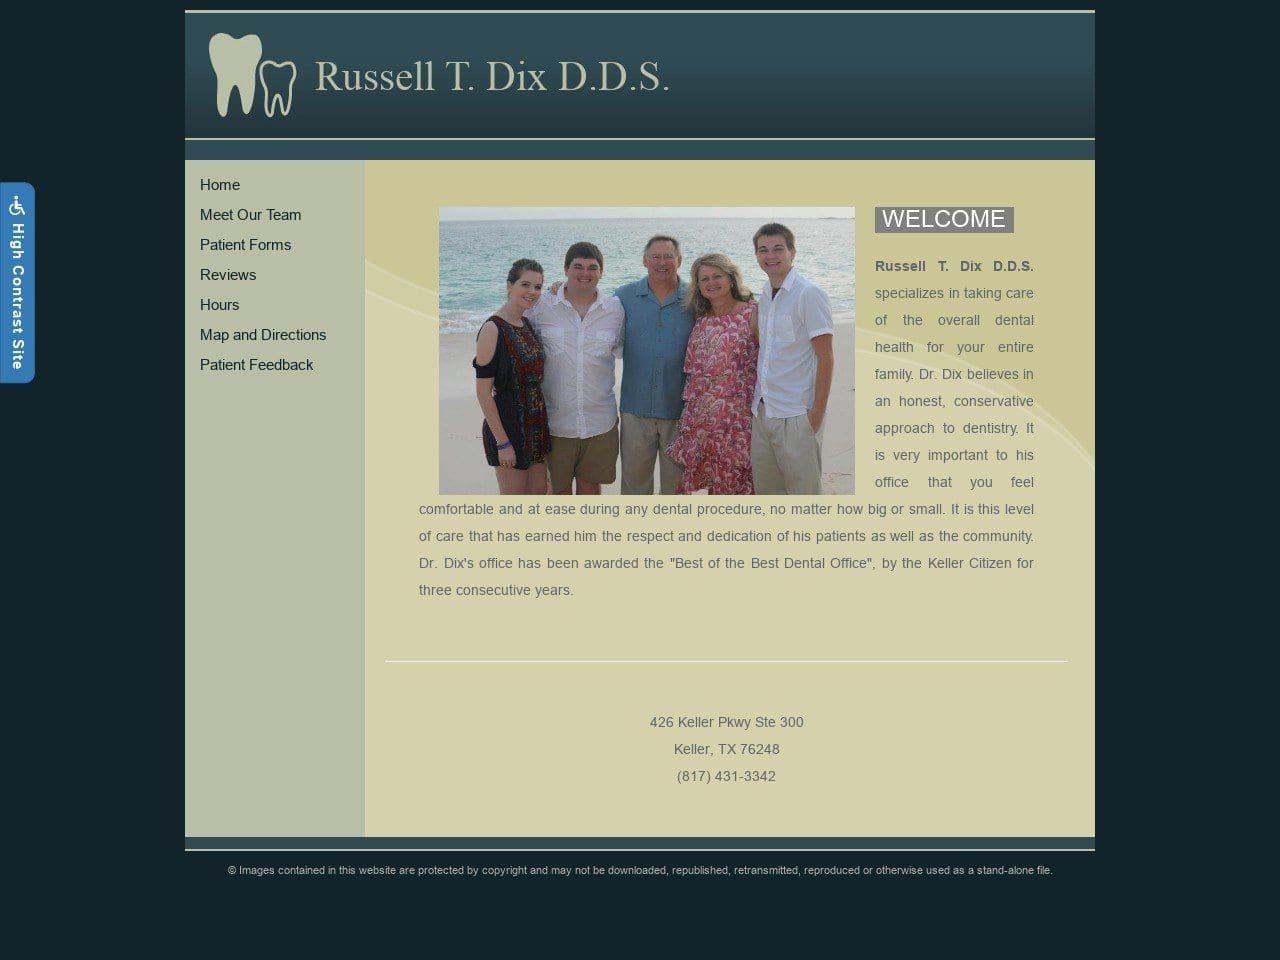 Russell T Dix Family Dentistry Dix Russell T DDS Website Screenshot from russelldixfamilydentistry.com